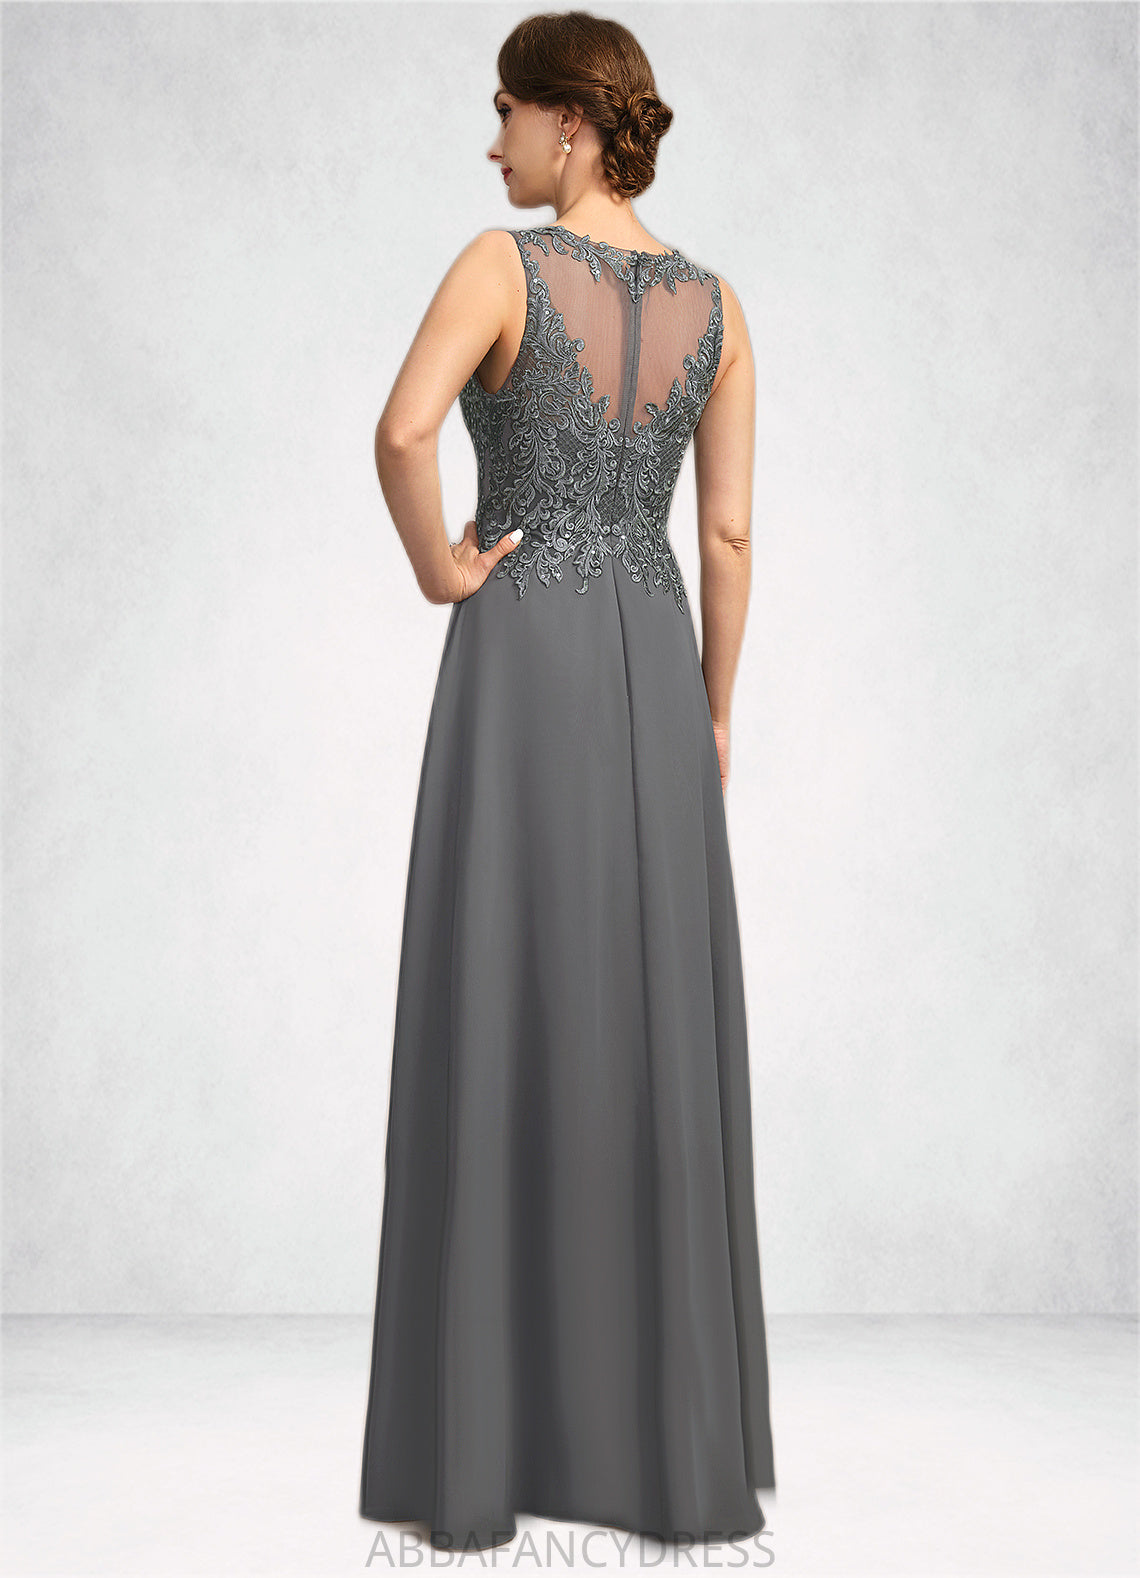 Luna A-line Scoop Illusion Floor-Length Chiffon Lace Mother of the Bride Dress With Sequins DRP0021921